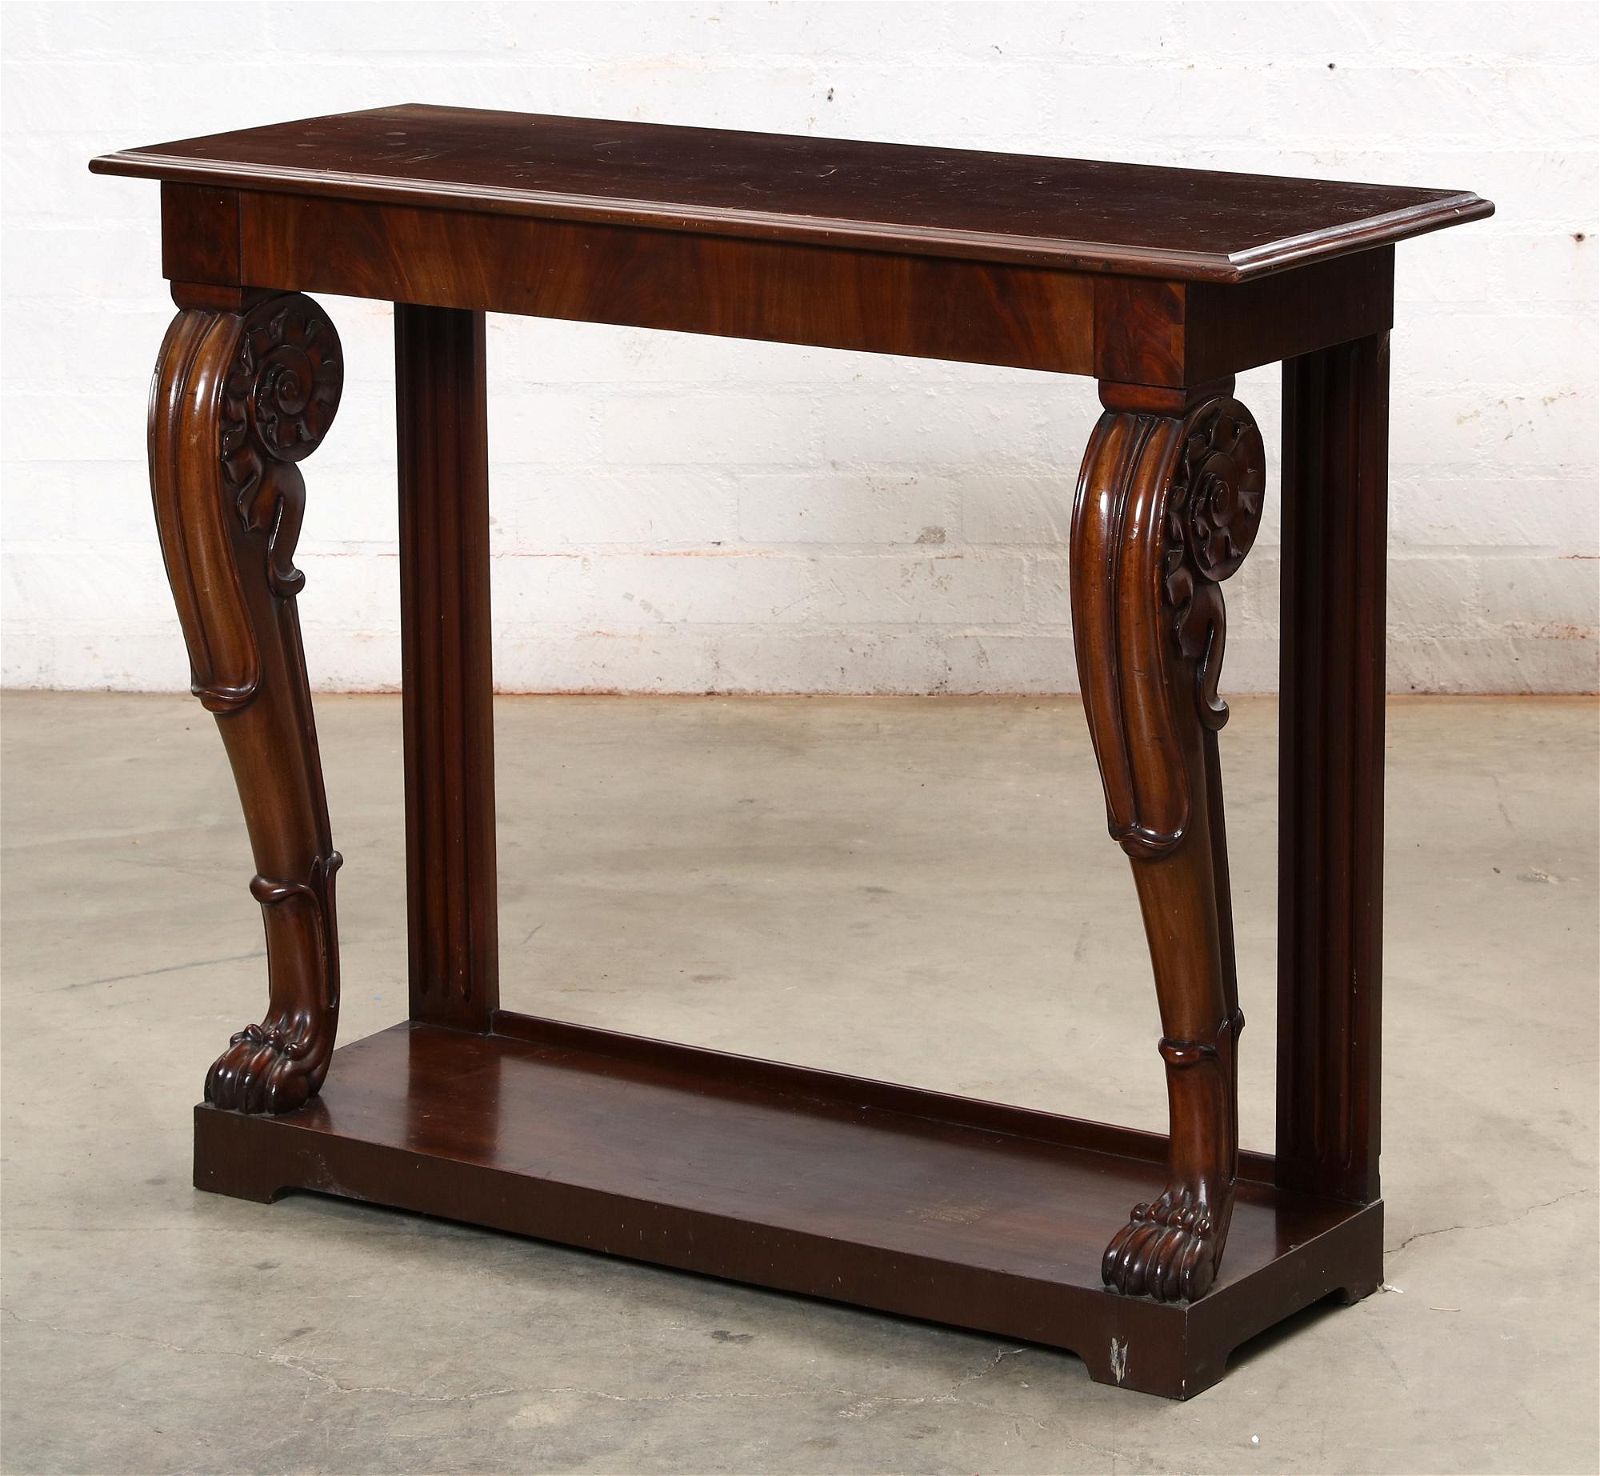 A NEOCLASSICAL STYLE MAHOGANY CONSOLE